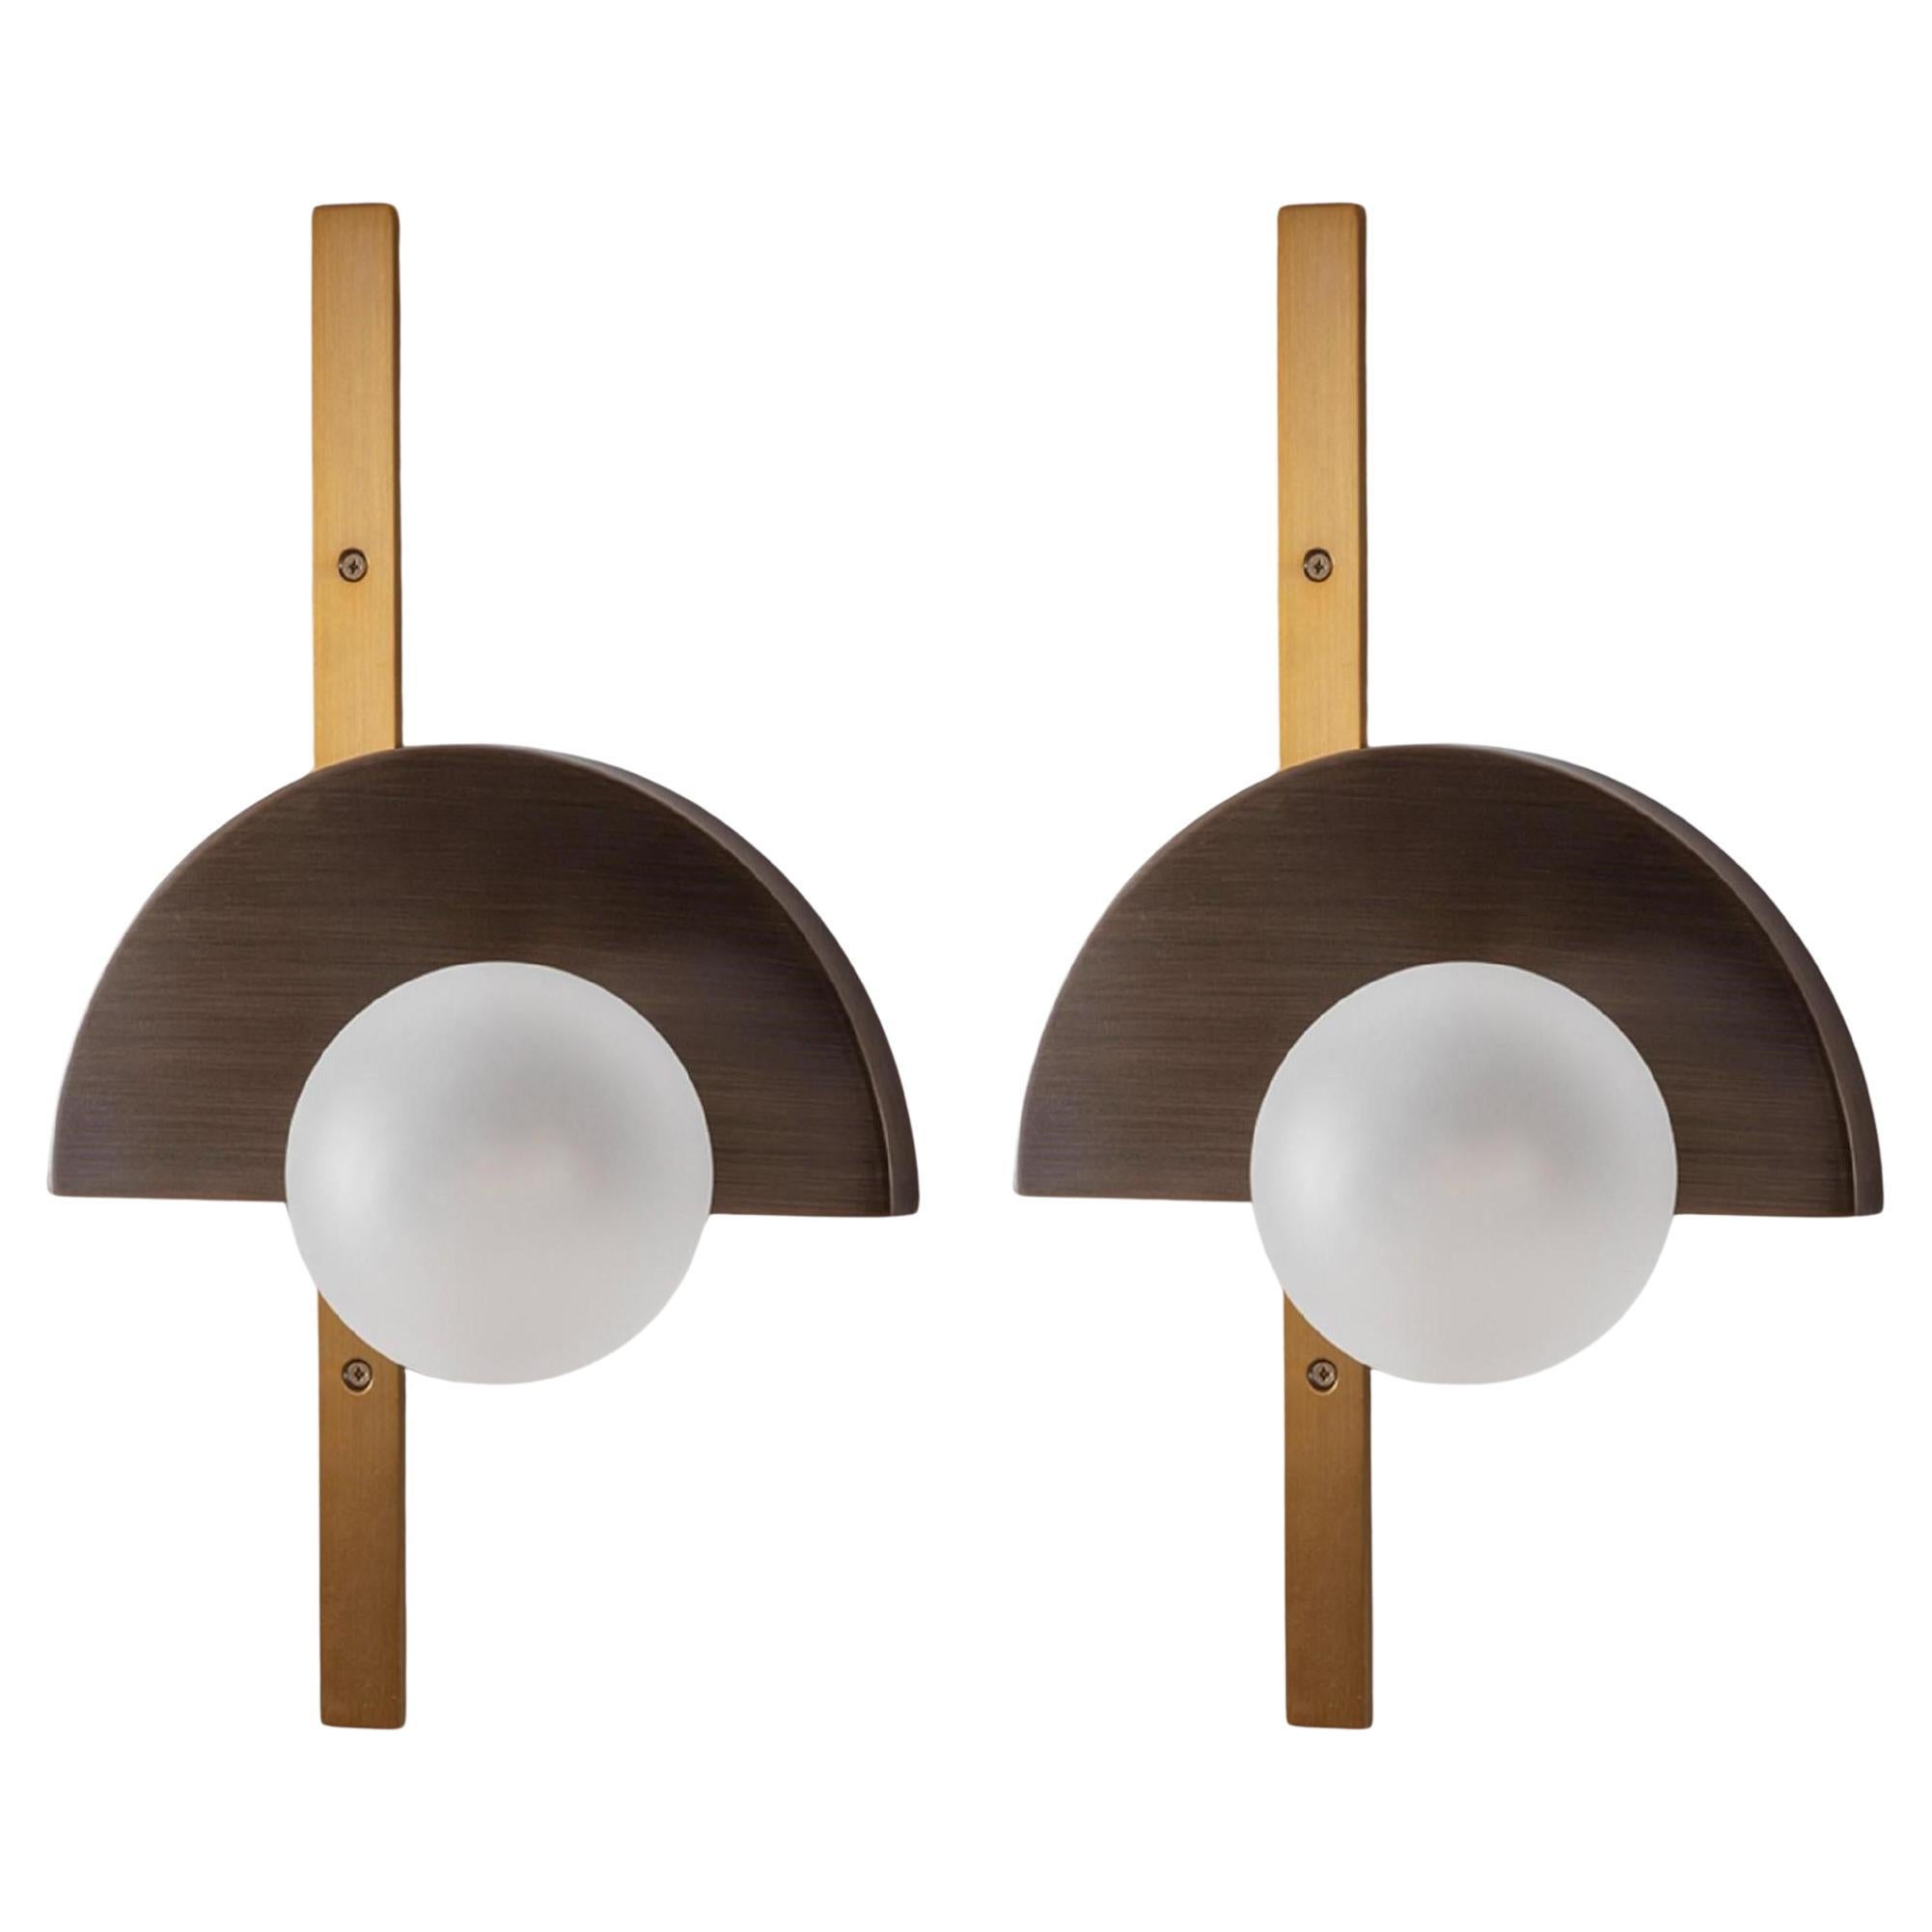 Set of 2 Brass Exhibition Wall Lights by Square in Circle